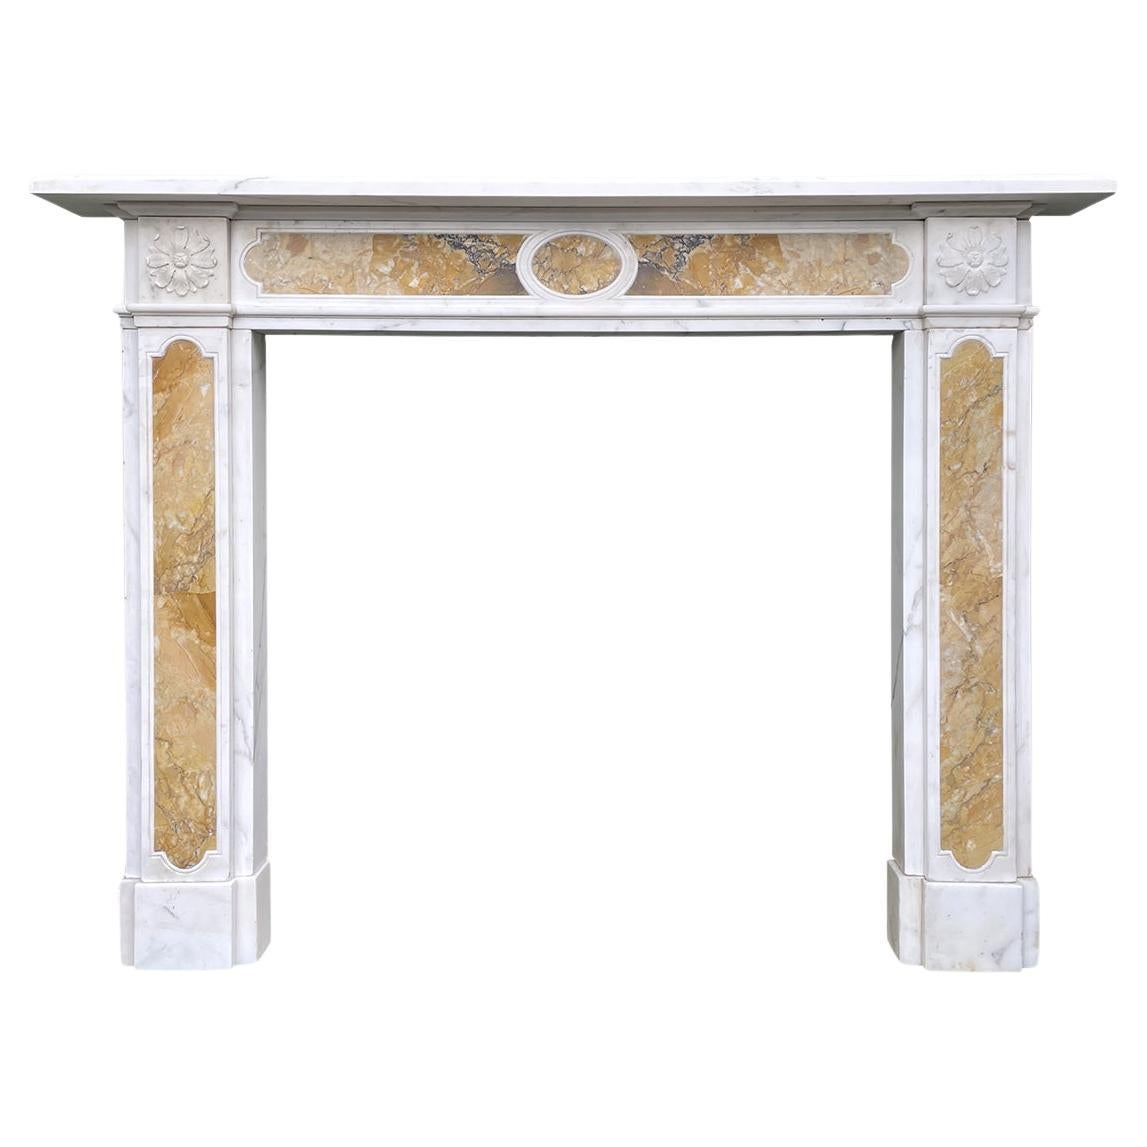 Antique Regency Style Statuary and Siena Marble Fireplace Mantel For Sale